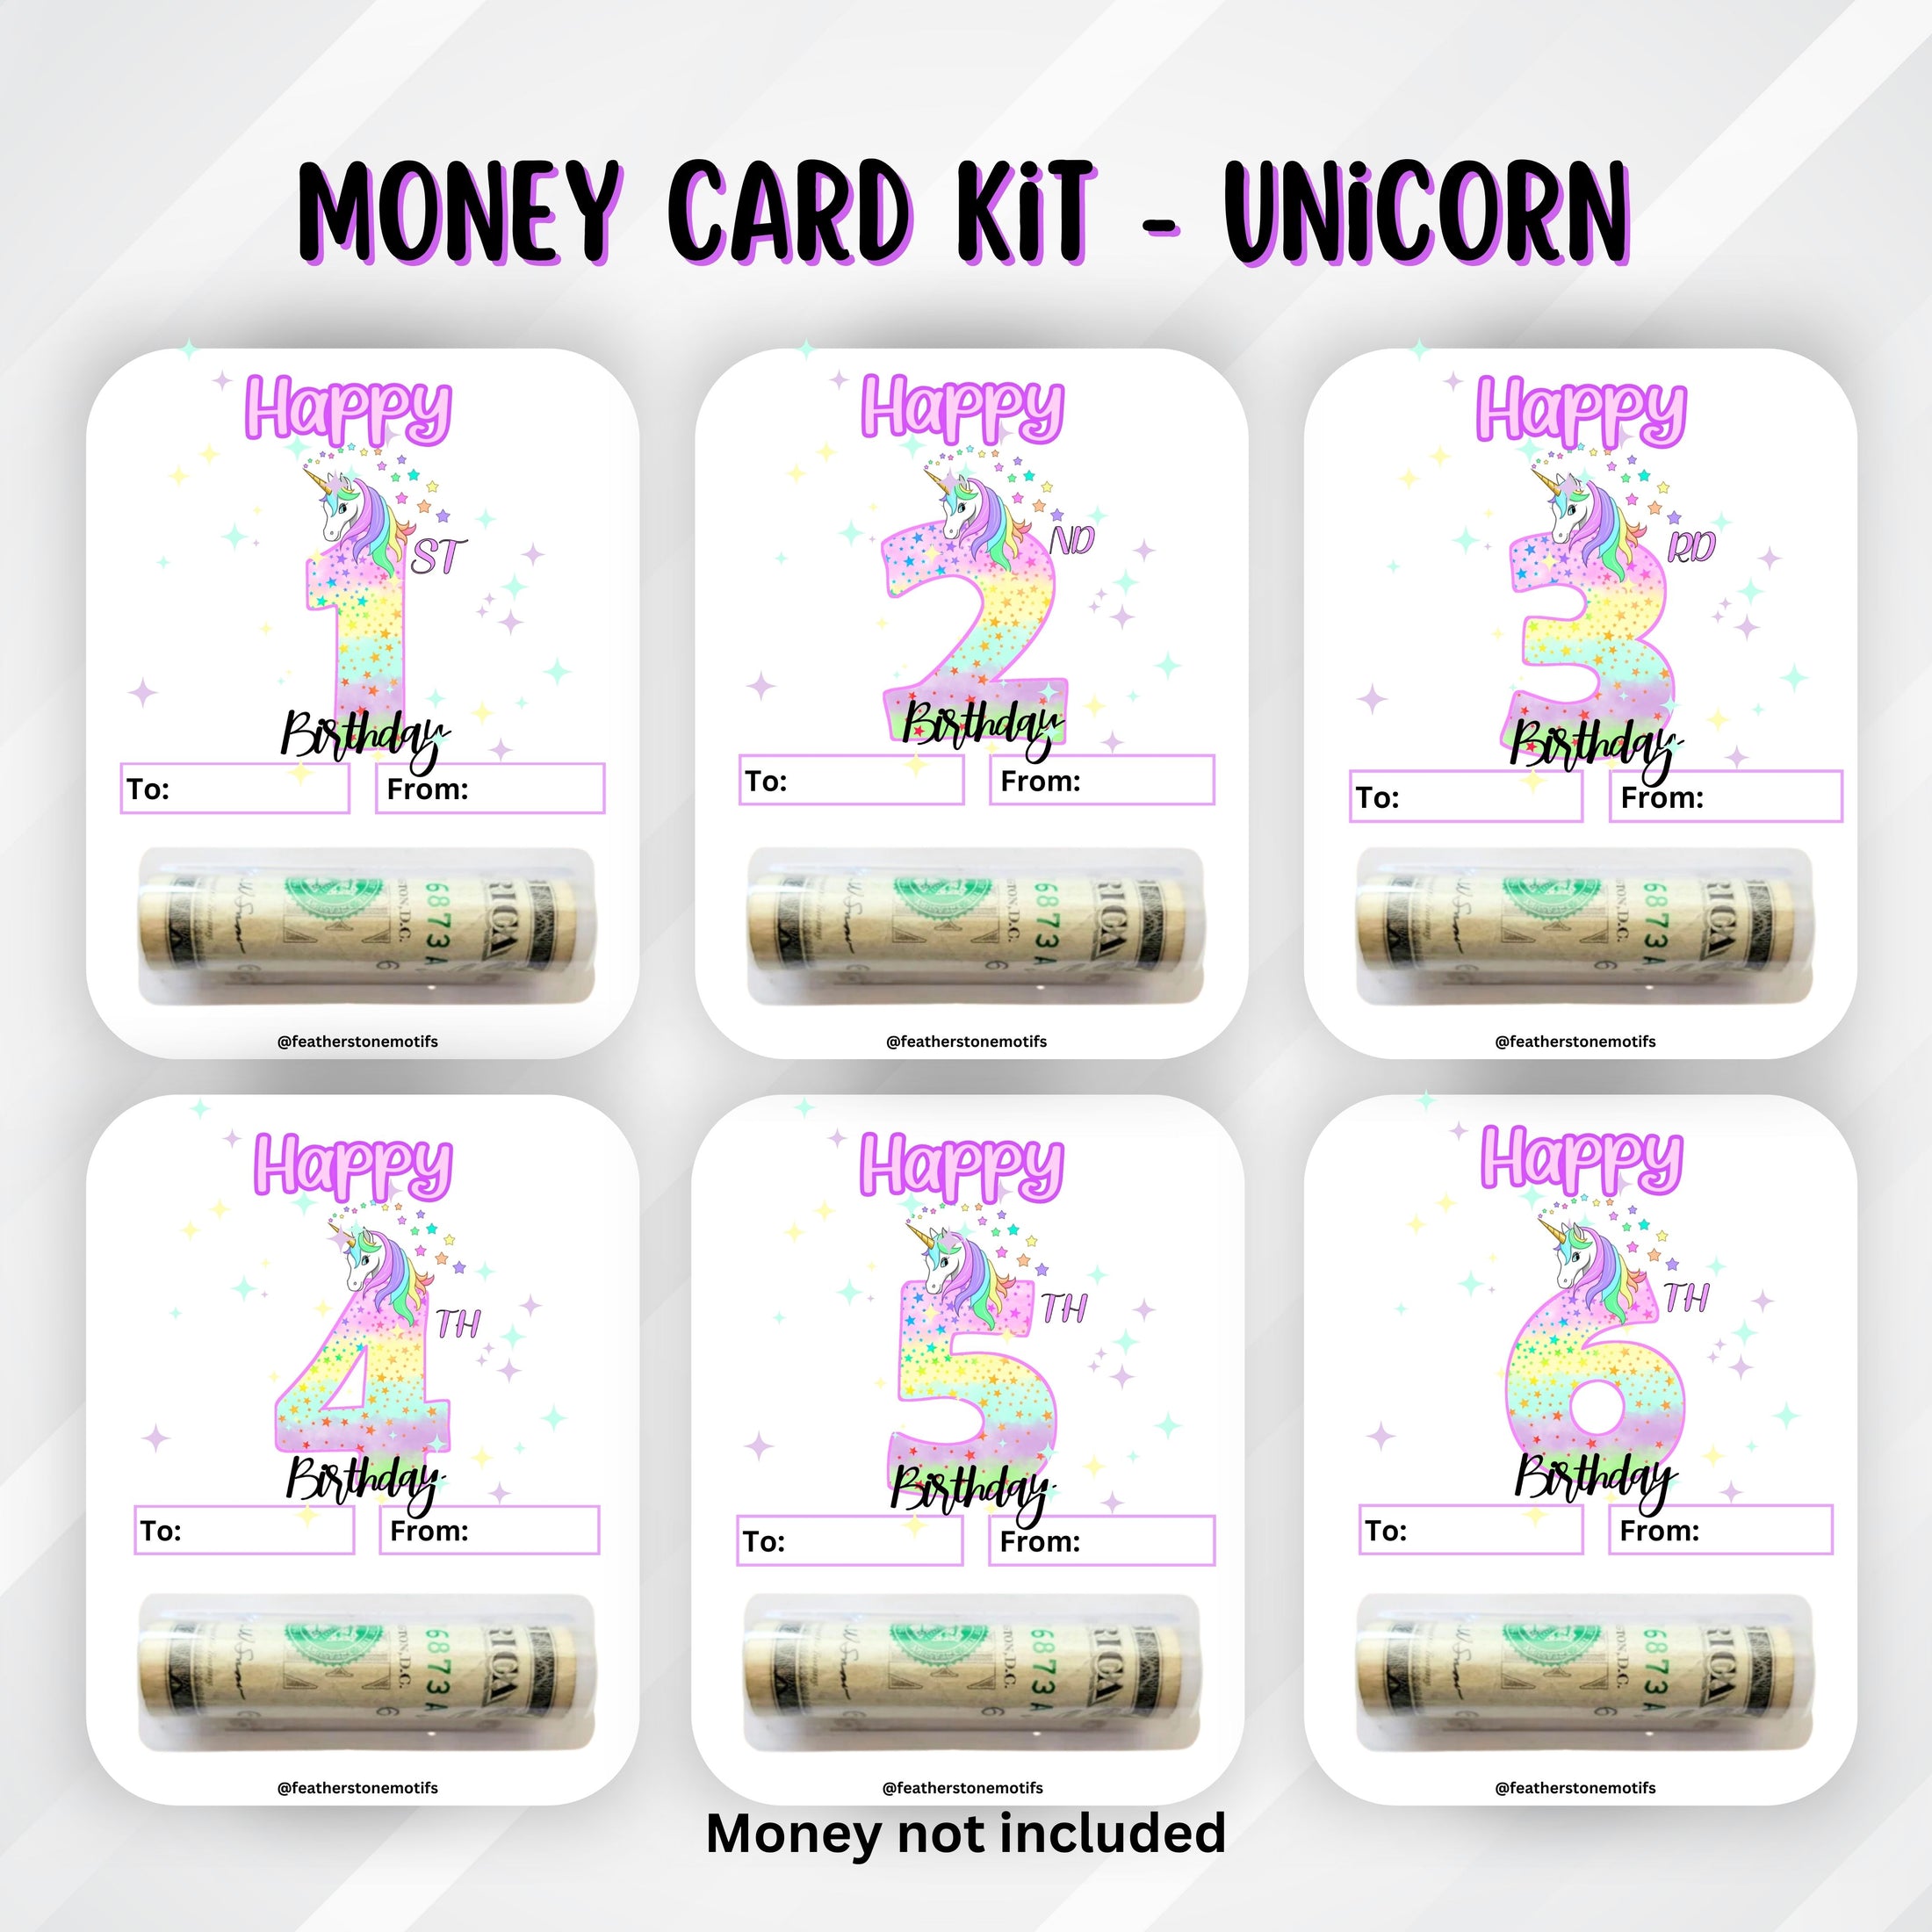 This image shows all six Unicorn Birthday Money Cards with money tubes attached.